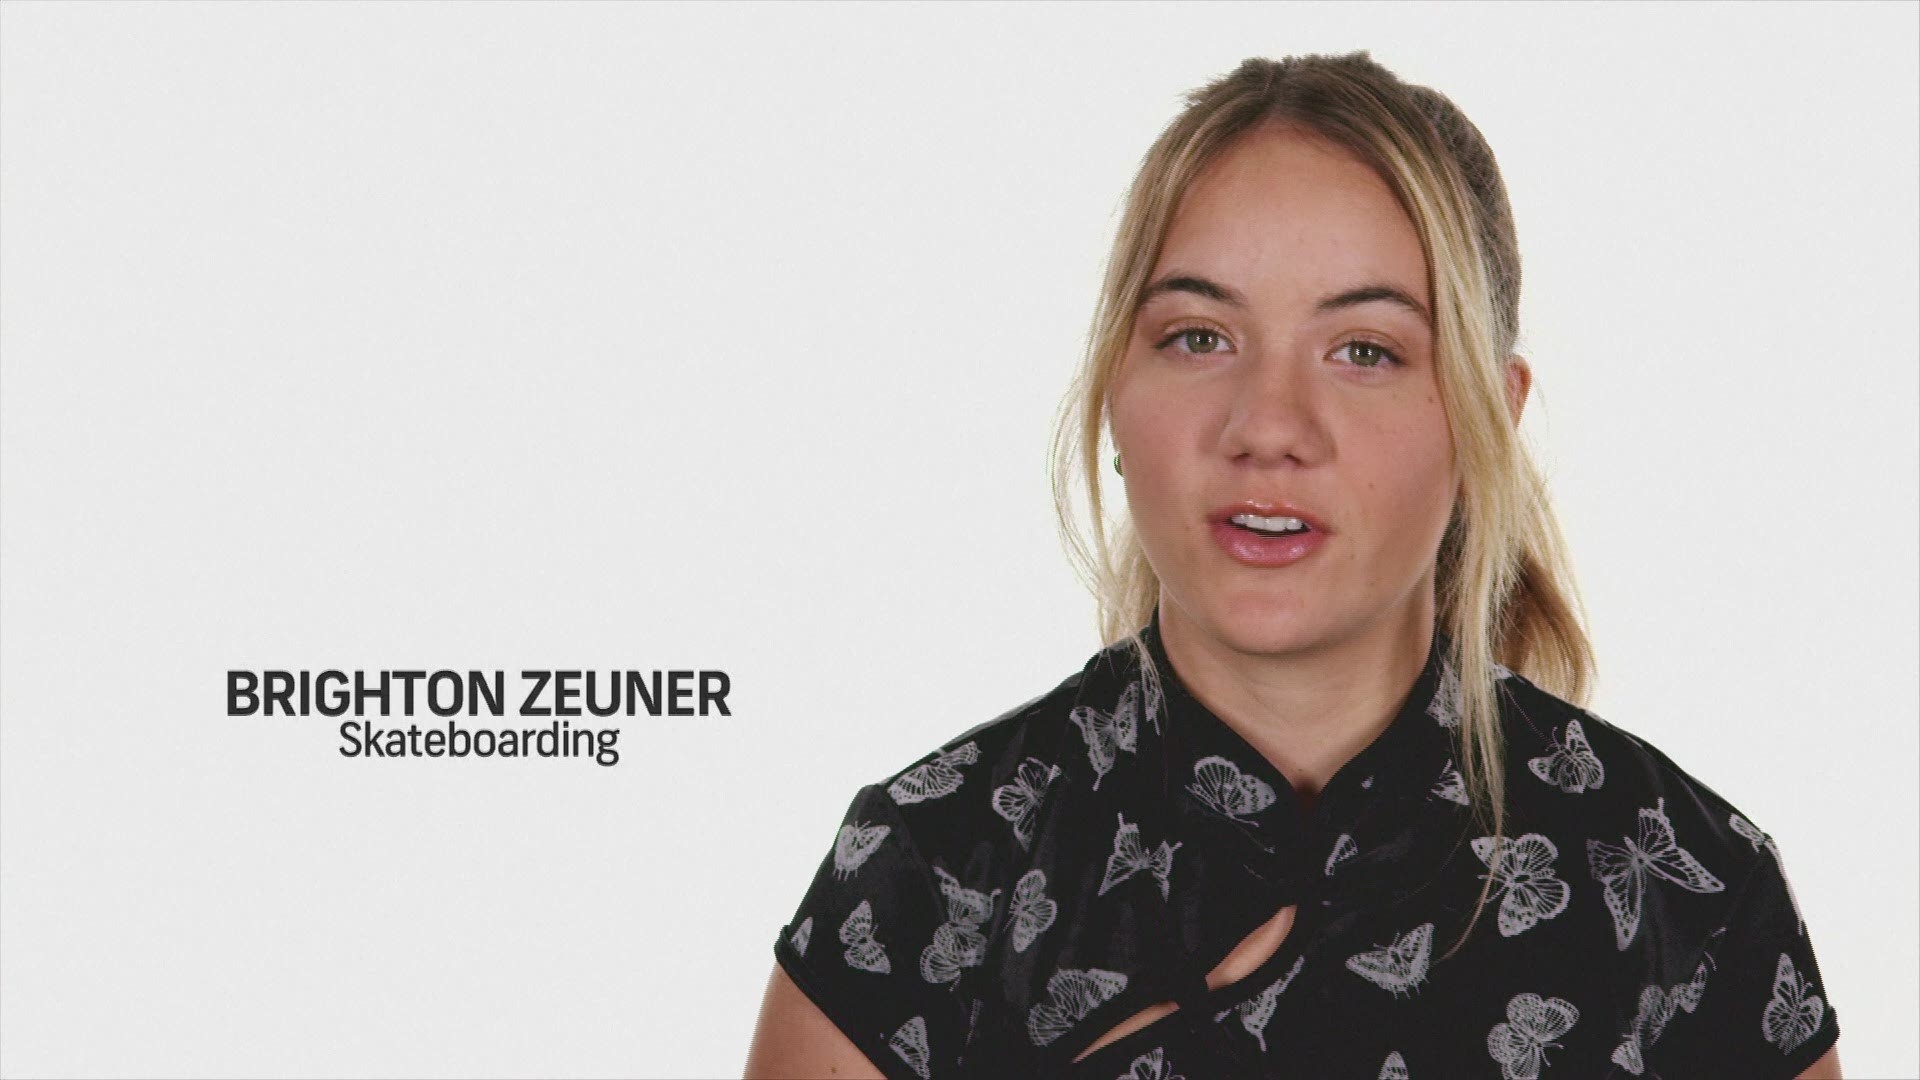 Brighton Zeuner could be one of the first skateboarders to represent the U.S. at the Olympics.